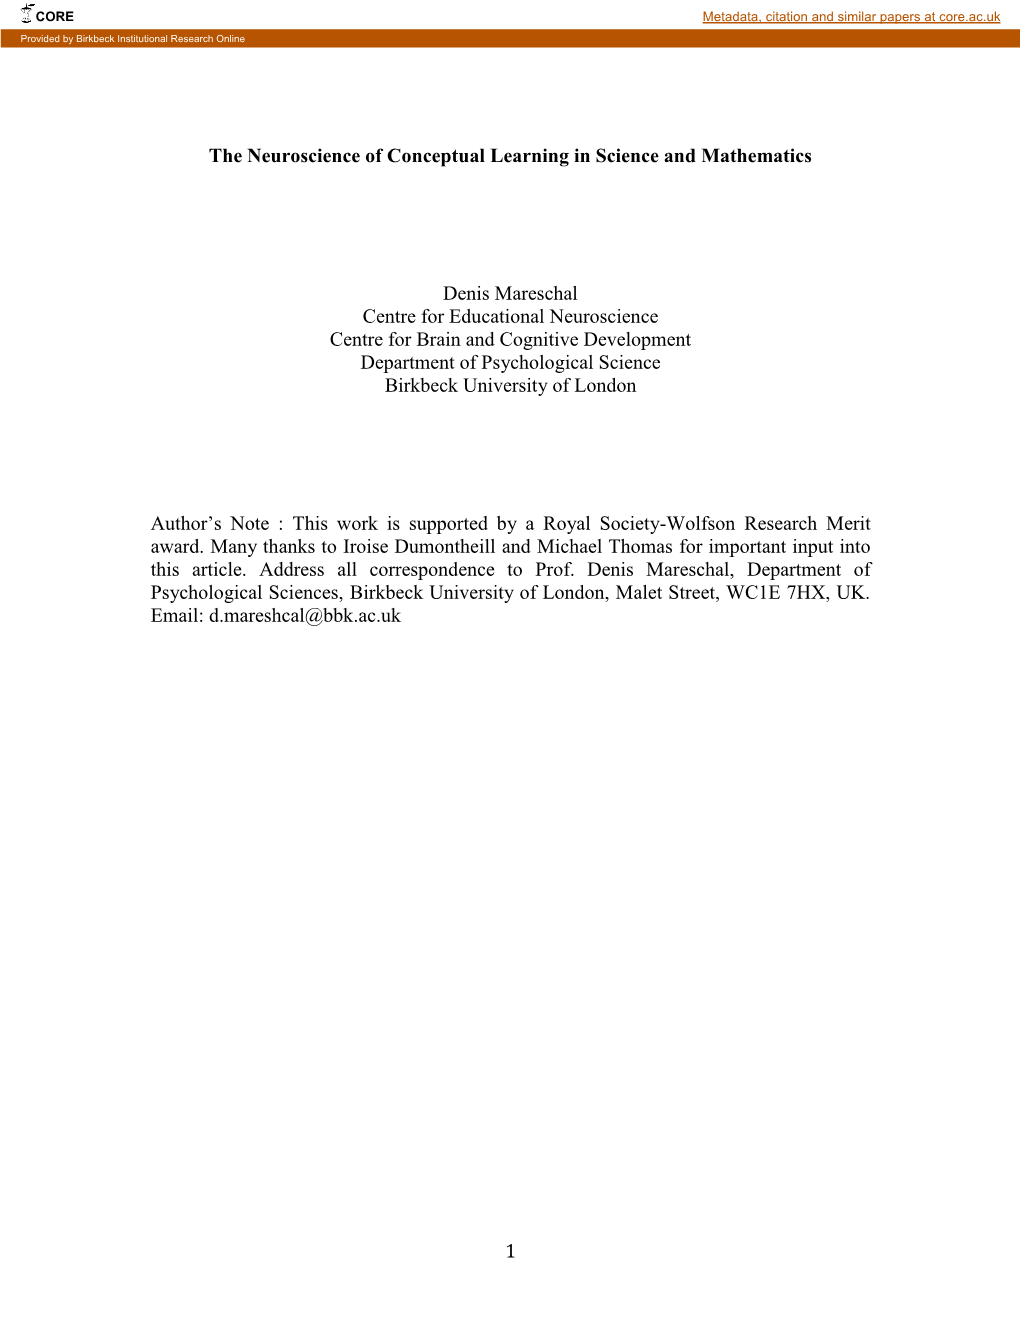 1 the Neuroscience of Conceptual Learning in Science And